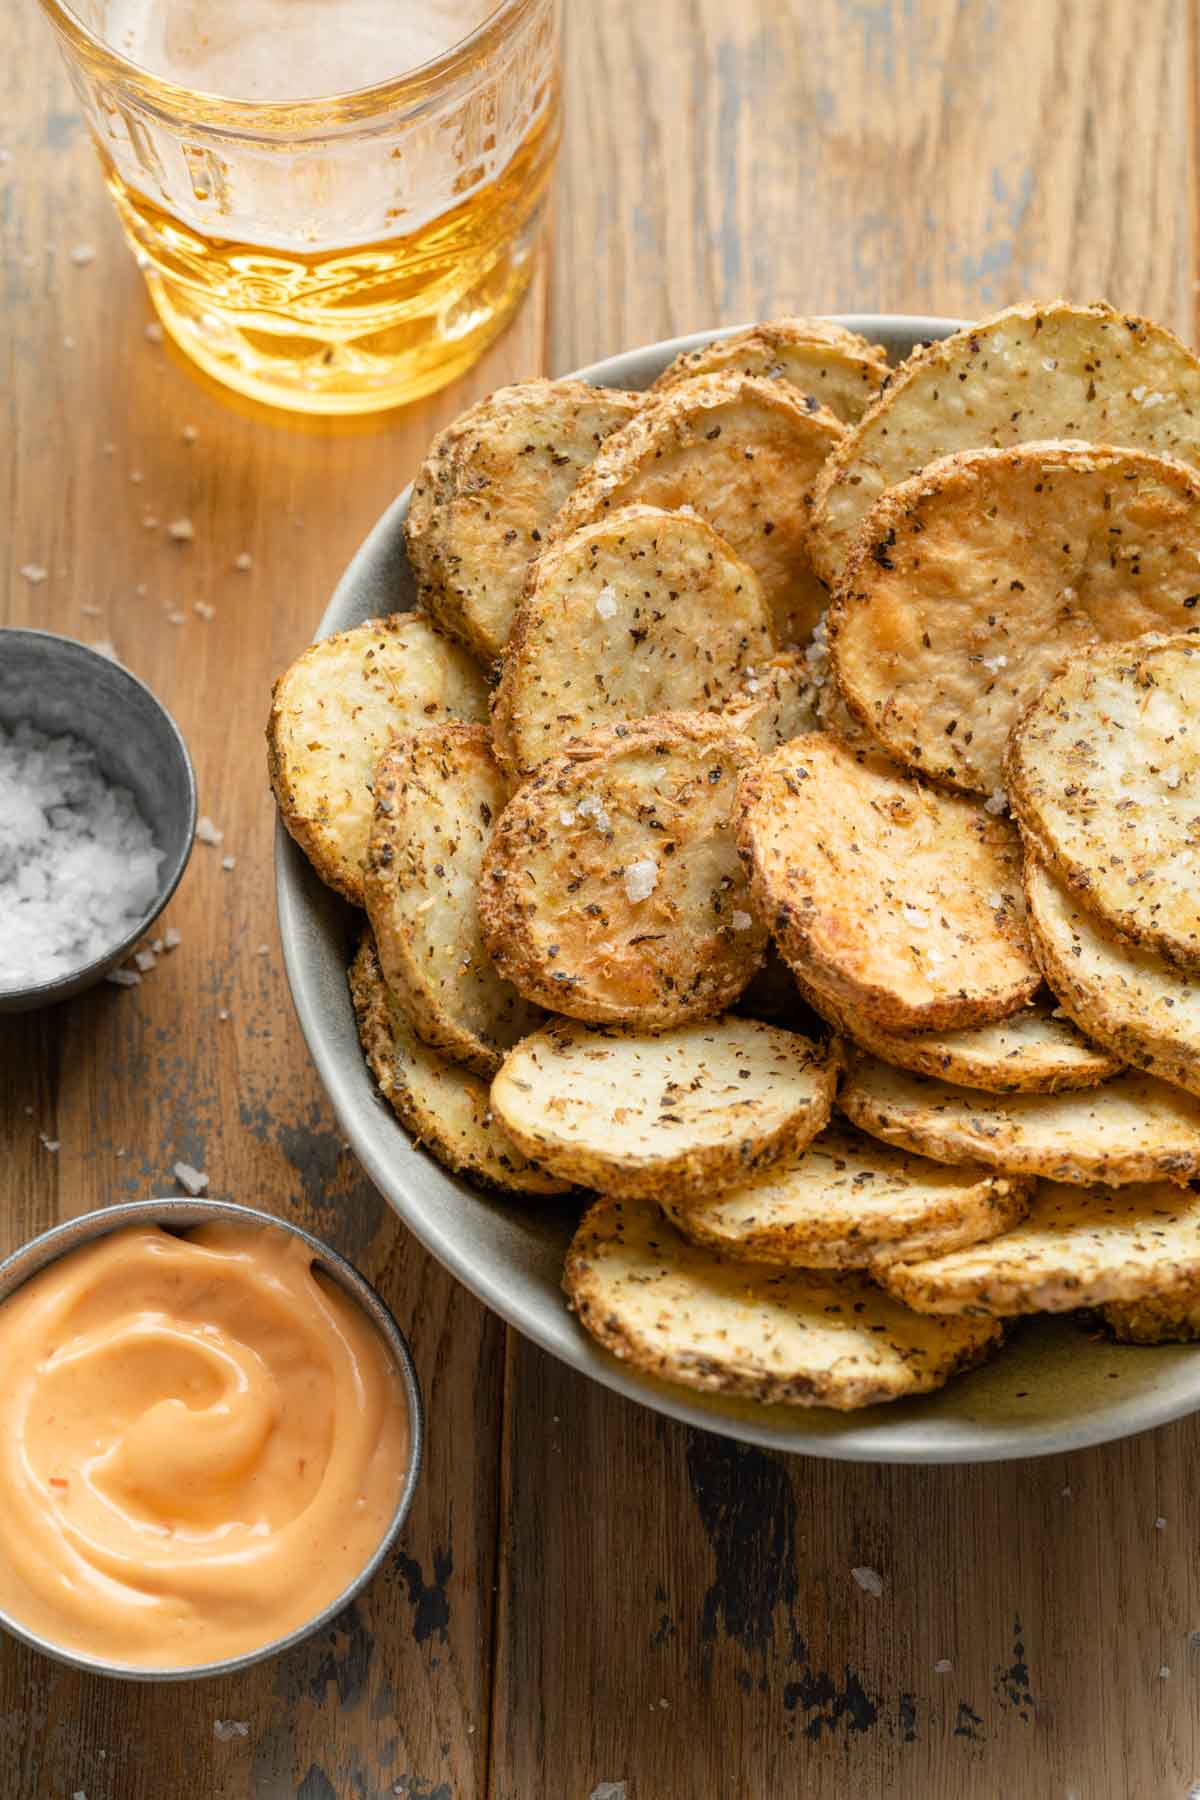 Angled view of potato slices in a grey bowl next to a bowl of dip and a drink in the background.